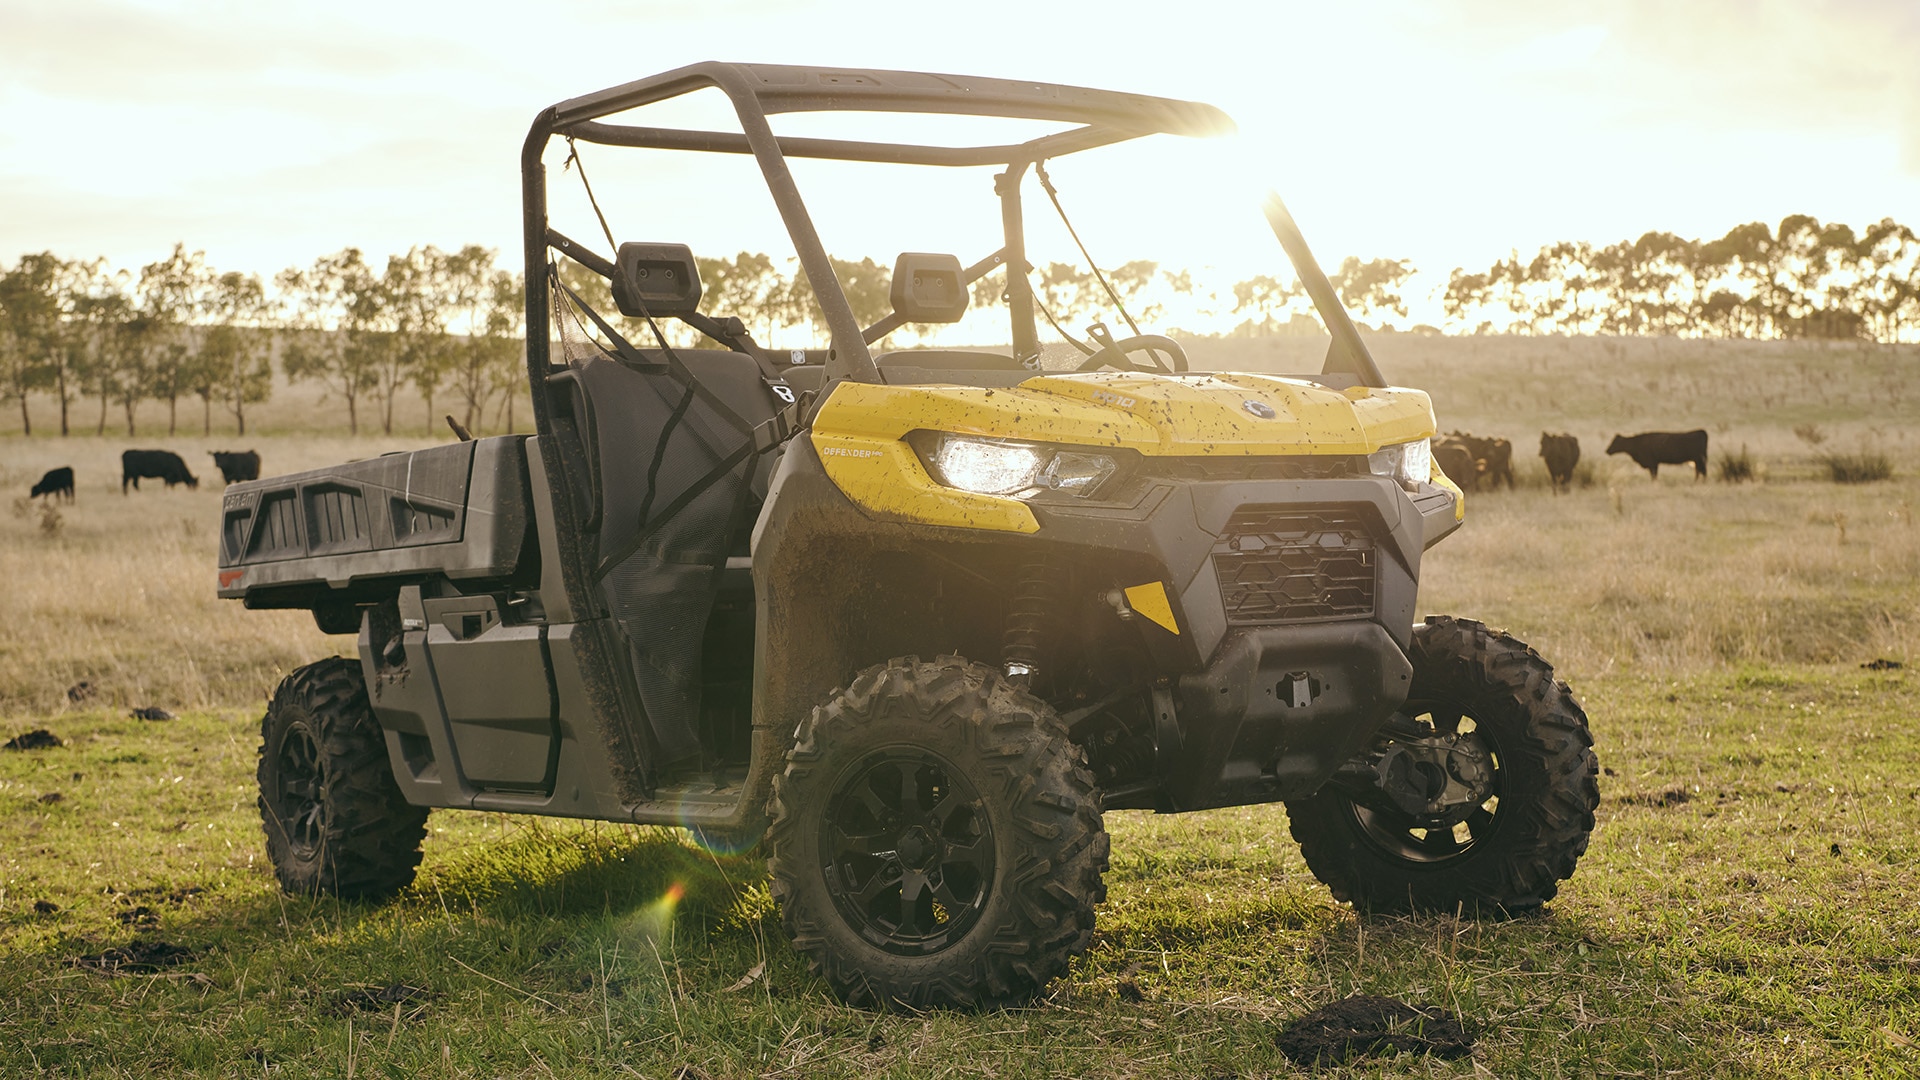 2022 Can-Am Defender Side-by-Side vehicle in a field